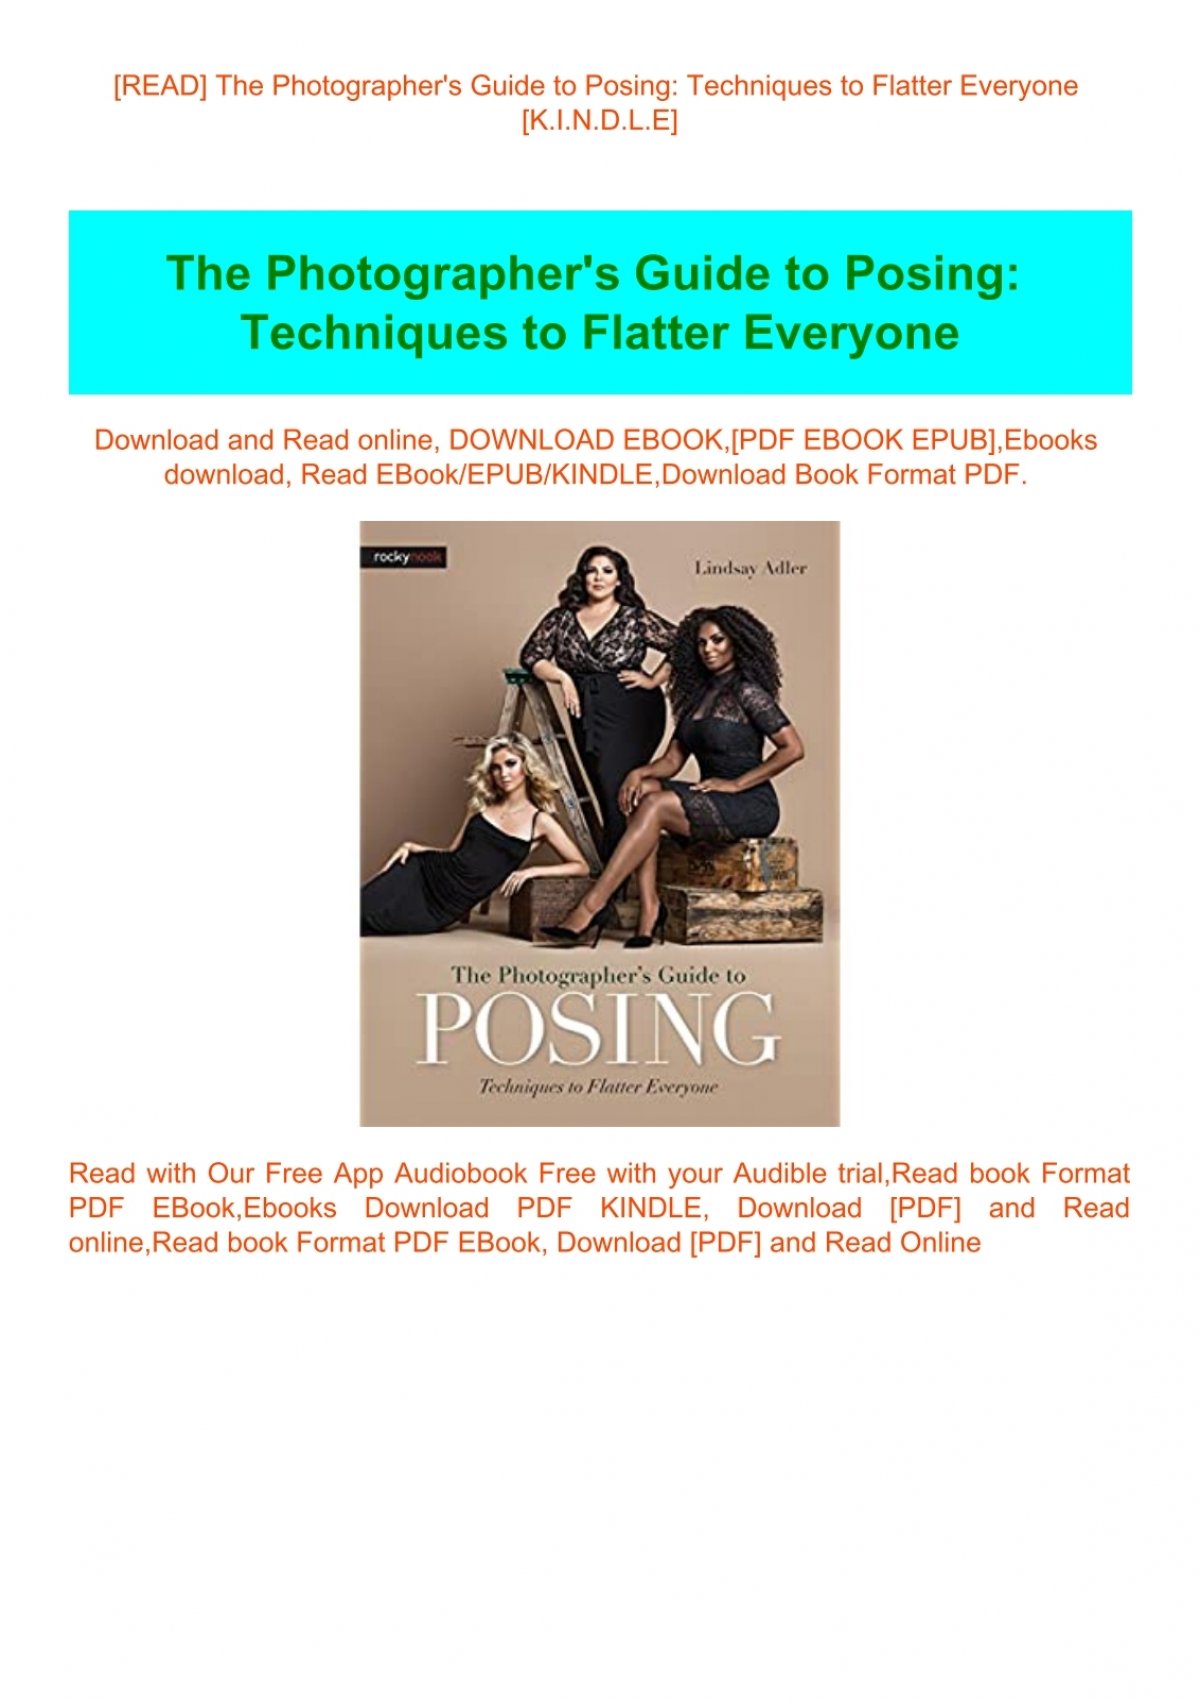 Full-Figured and Fabulous Posing Guide - Learn with Lindsay Adler